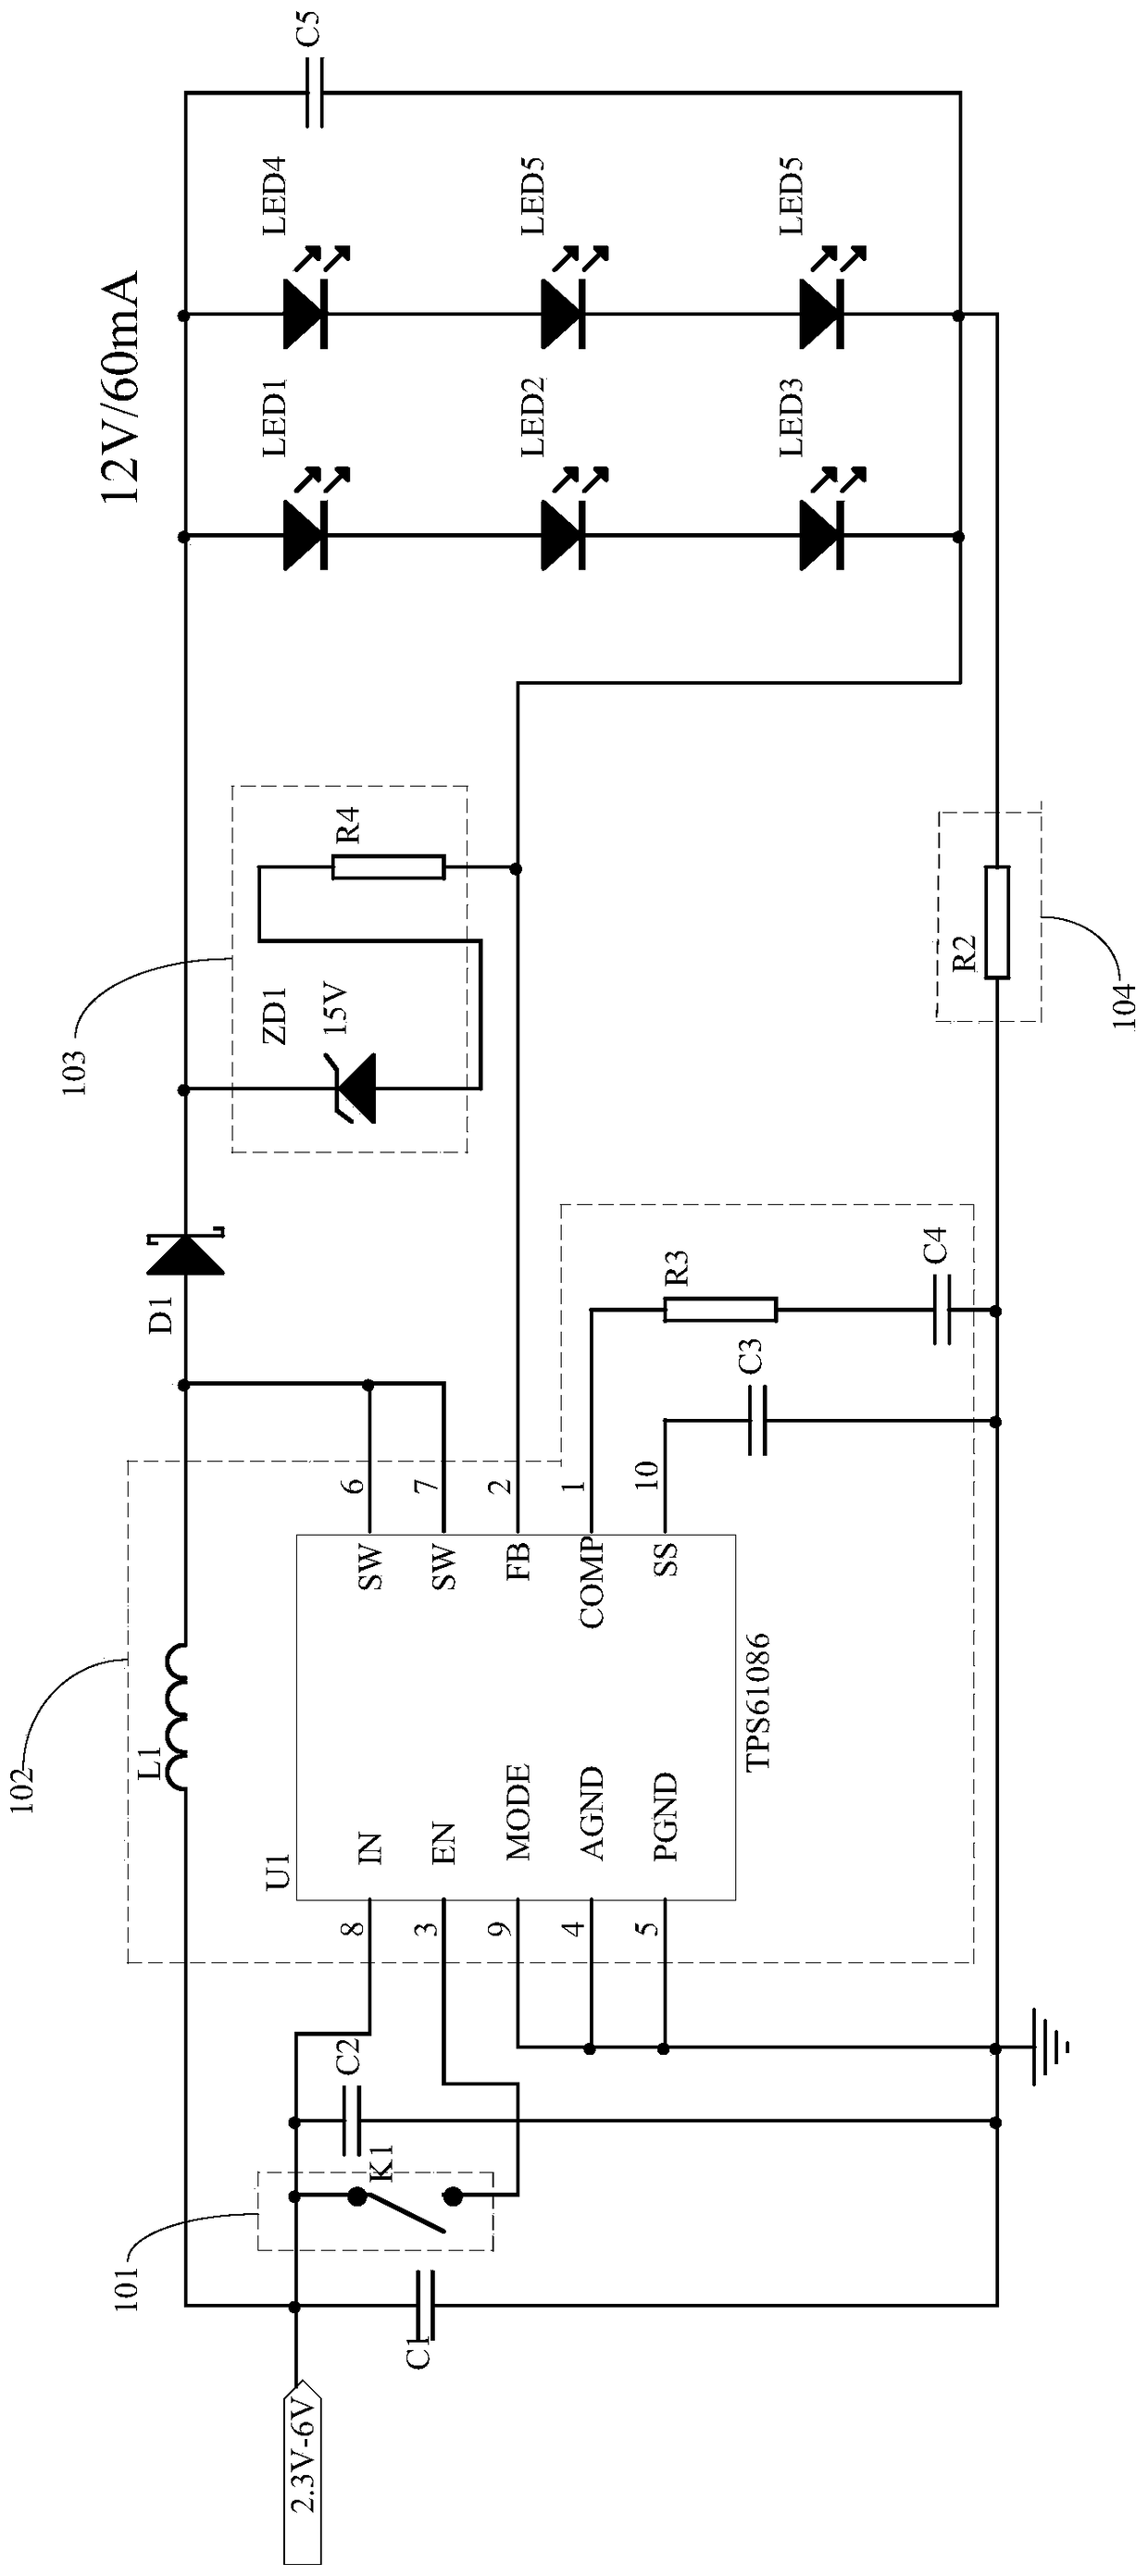 Constant current drive led overcurrent and overvoltage protection circuit